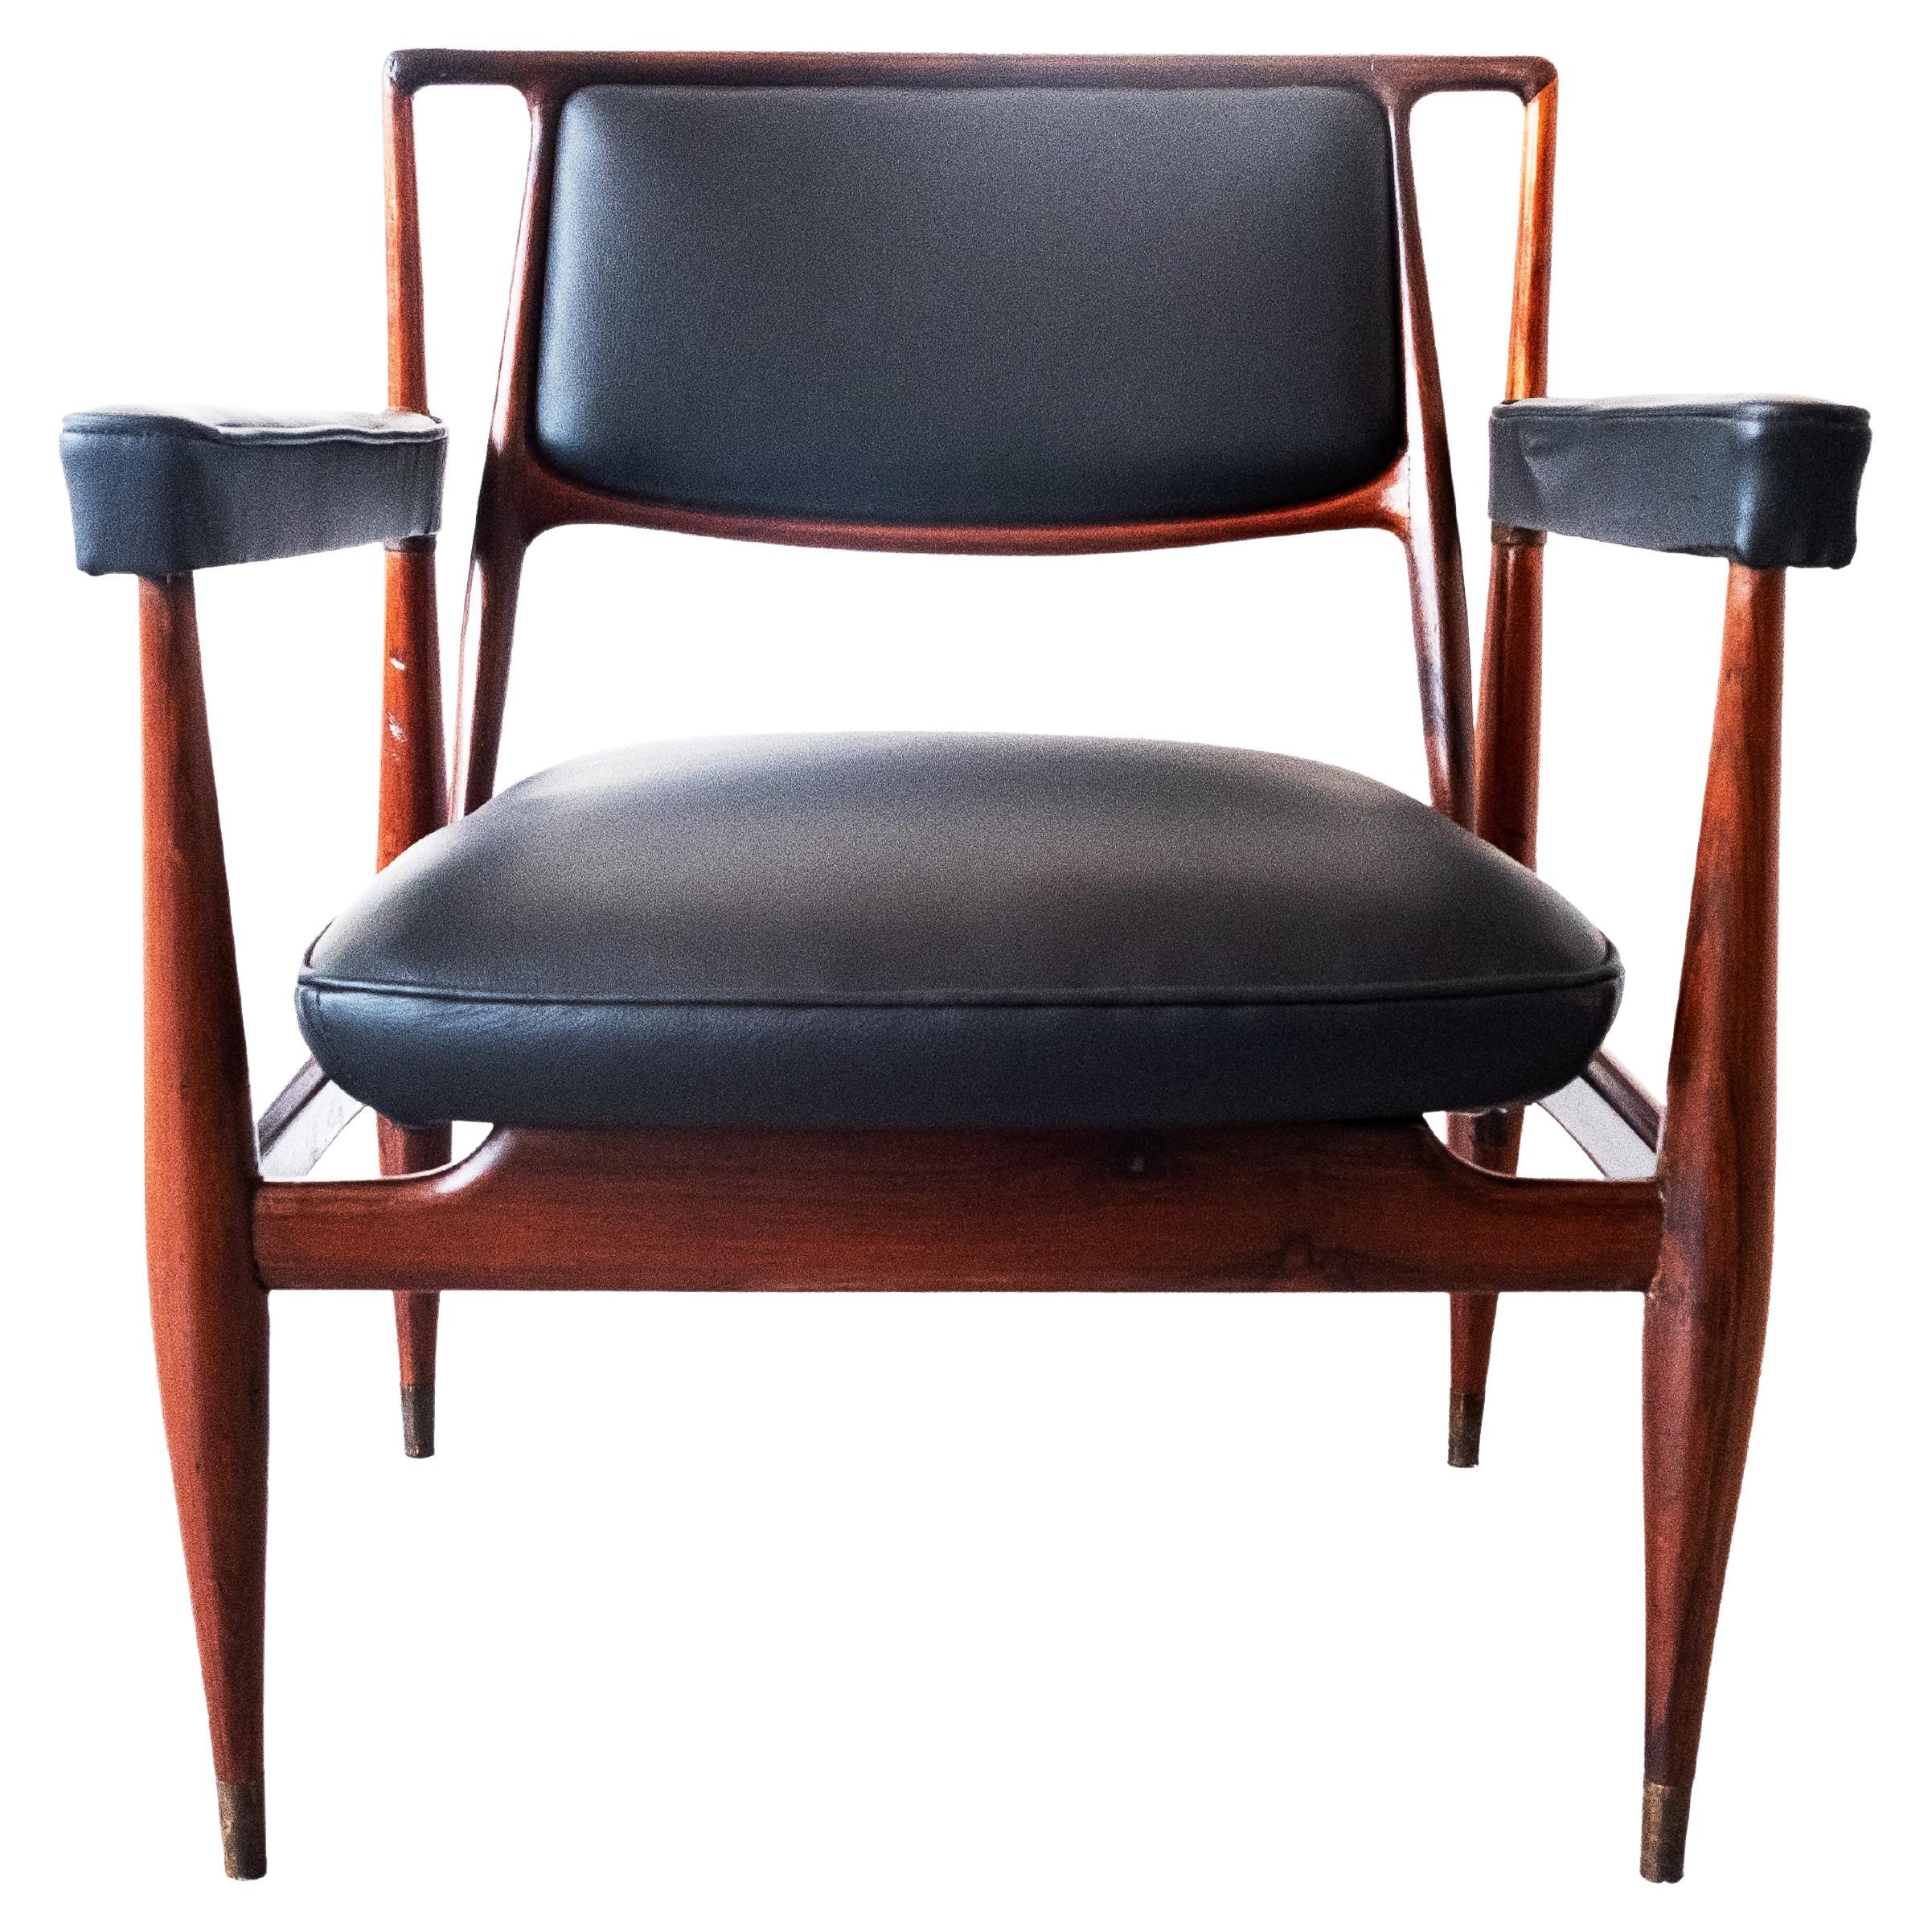 Solid Wood rare Armchair by Moveis Ambiente, Brazil, 1960s For Sale